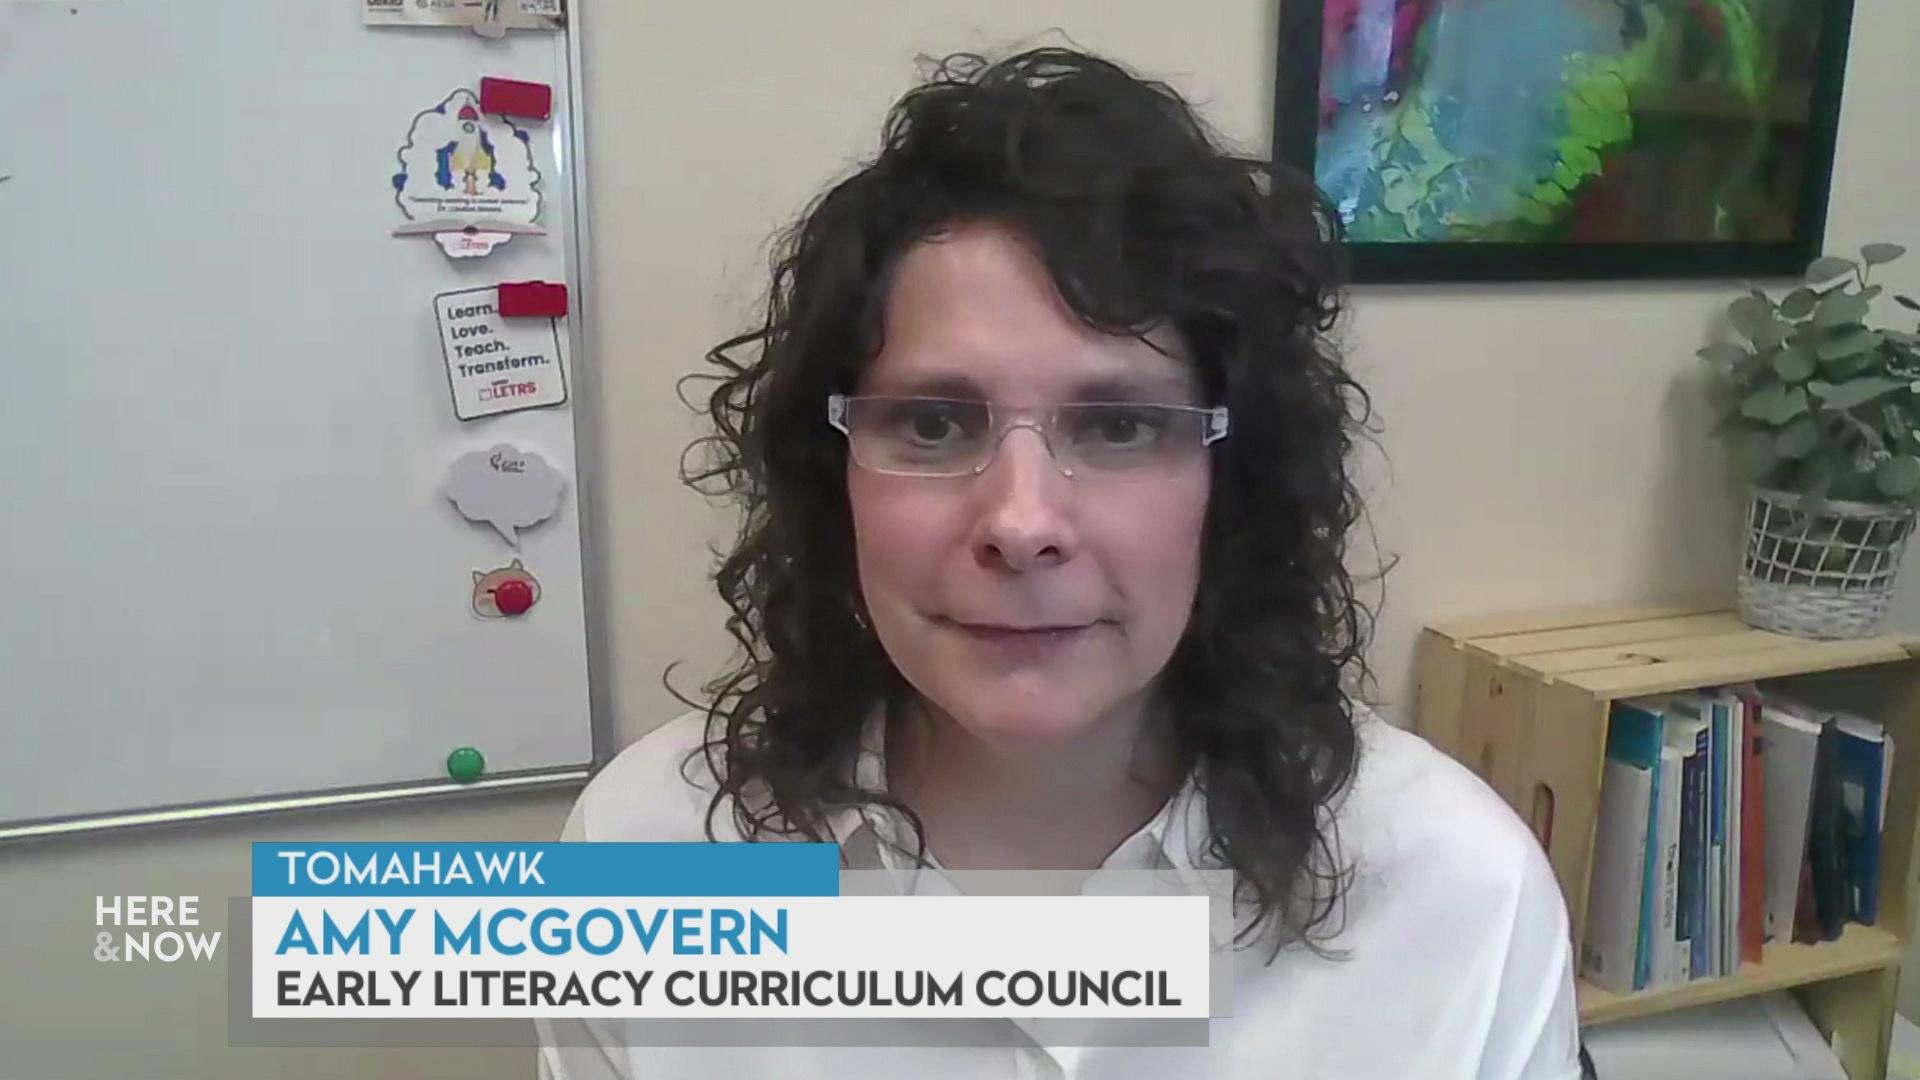 A still image from a video shows Amy McGovern seated in front of whiteboard with magnets with a graphic at bottom reading 'Tomahawk,' 'Amy McGovern' and 'Early Literacy Curriculum Council.'